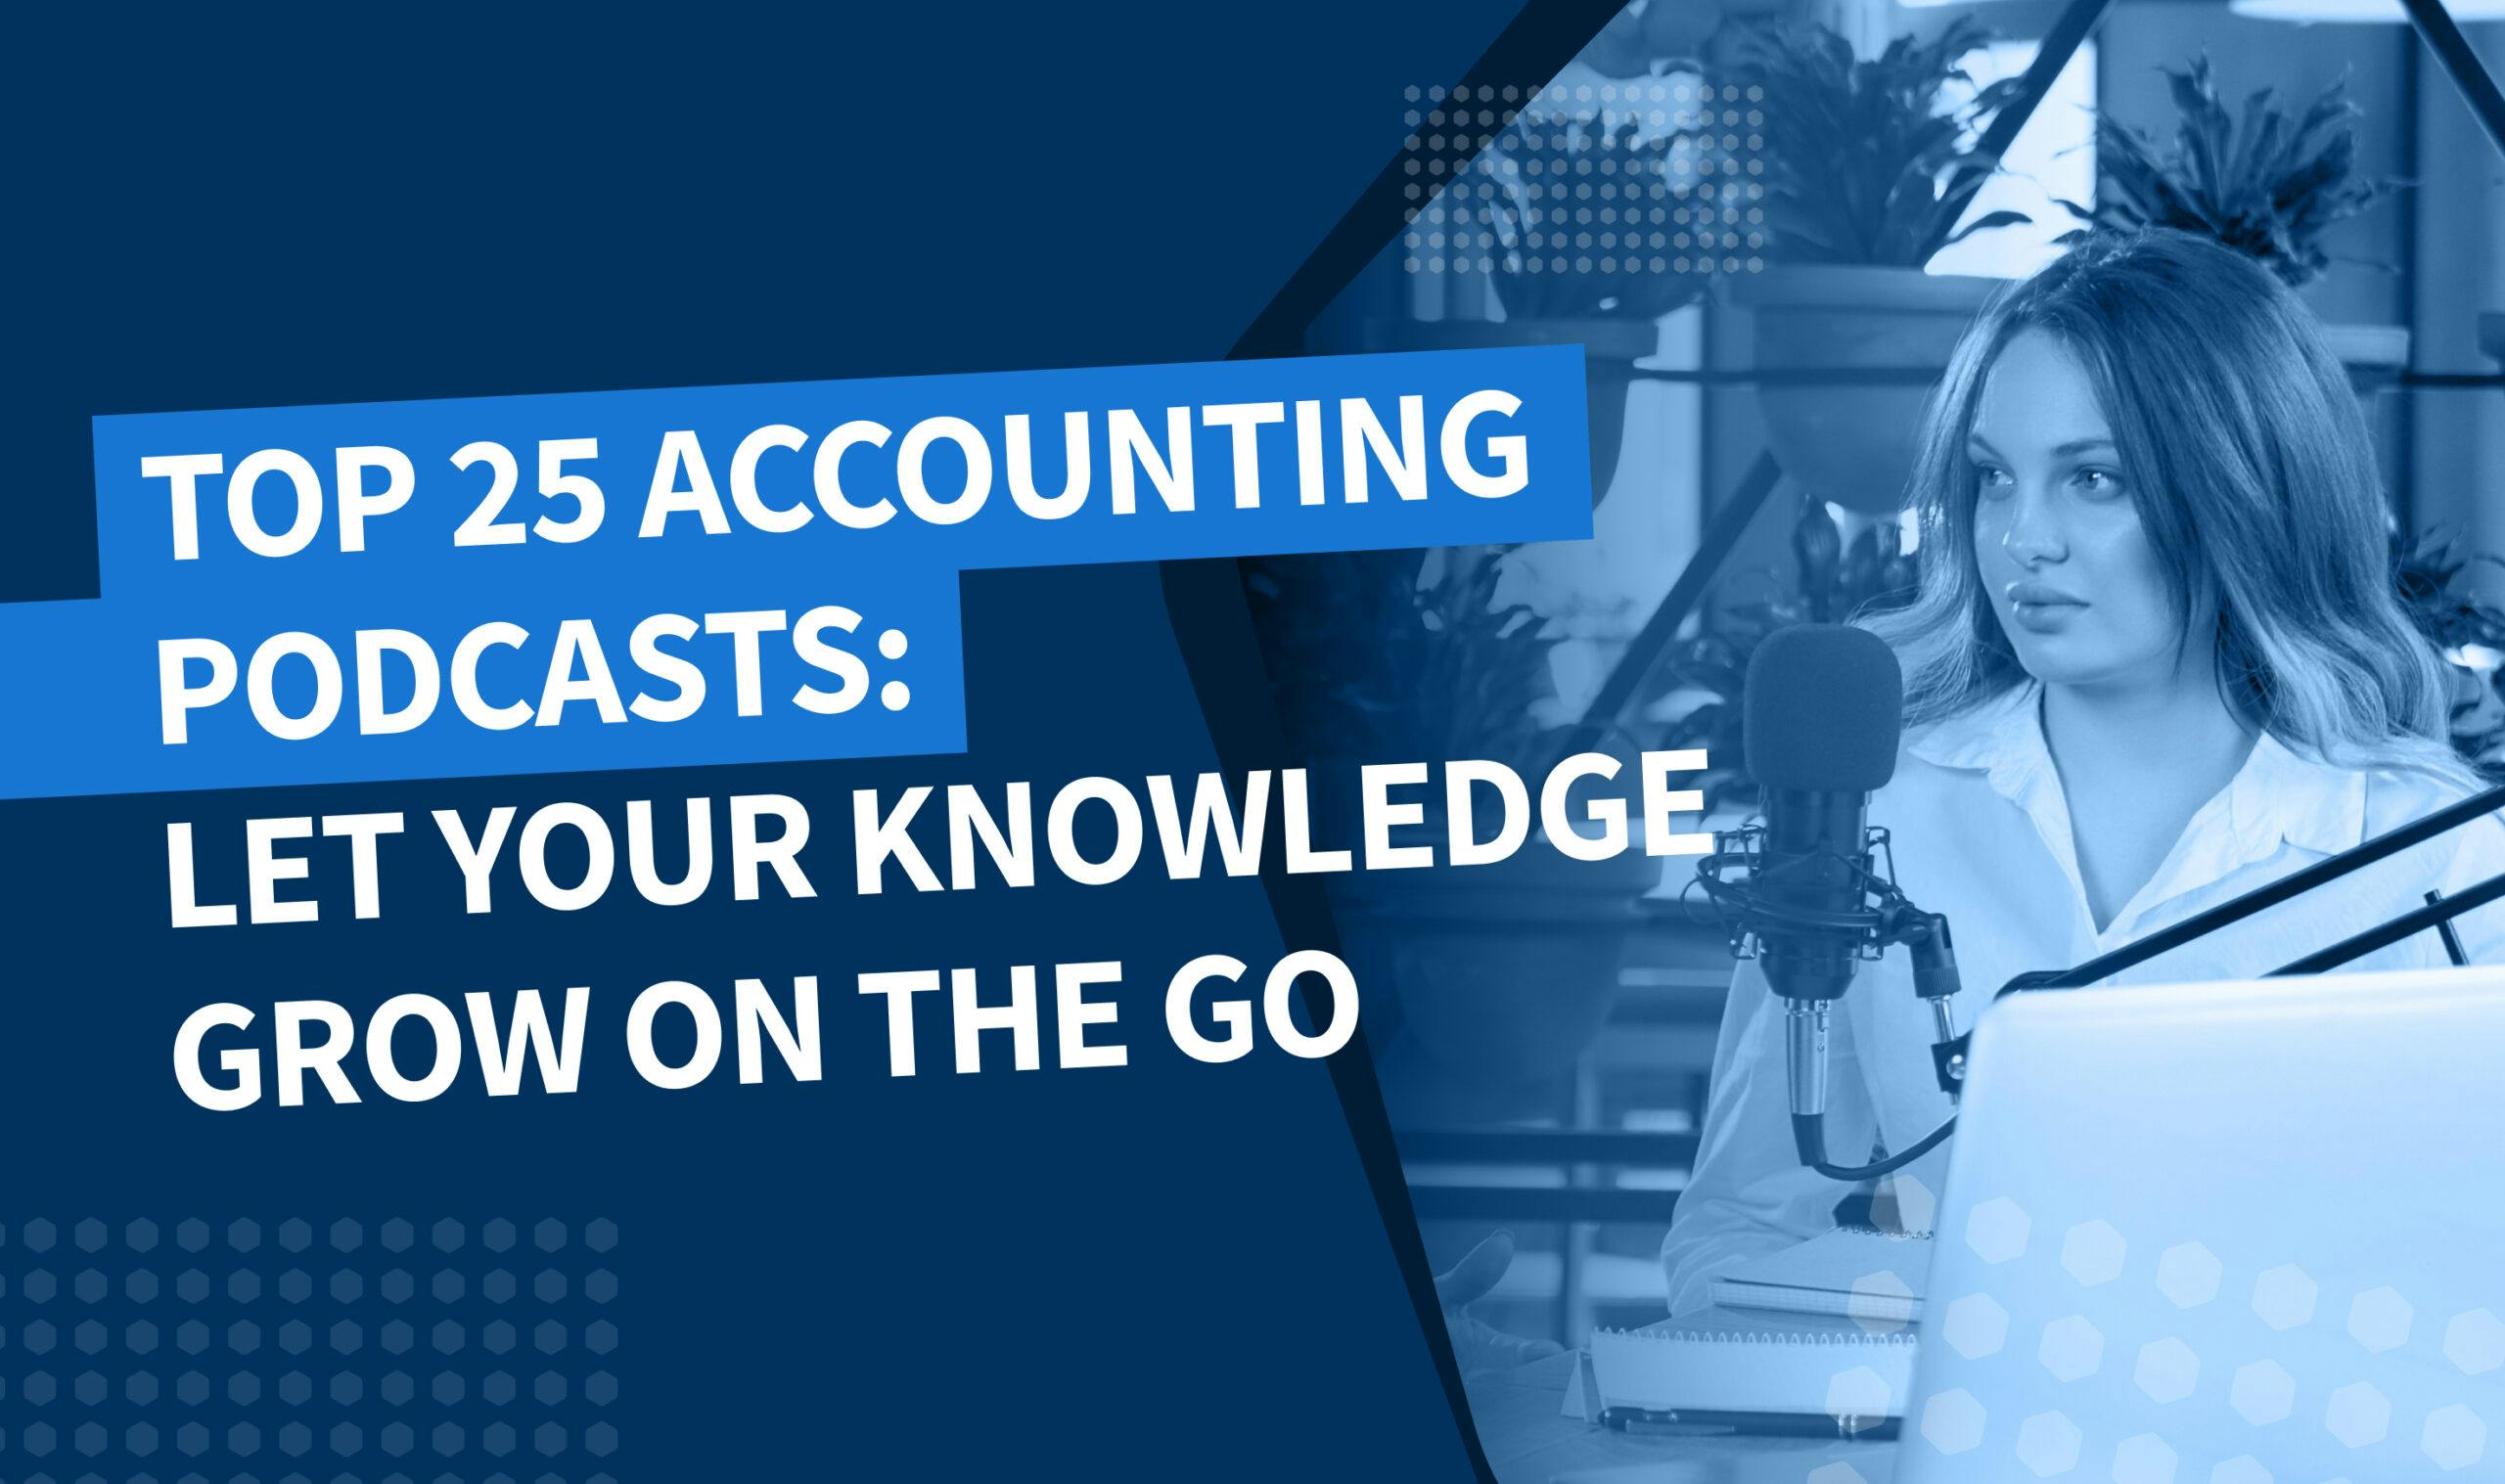 Top 25 accounting podcasts: let your knowledge grow on the go